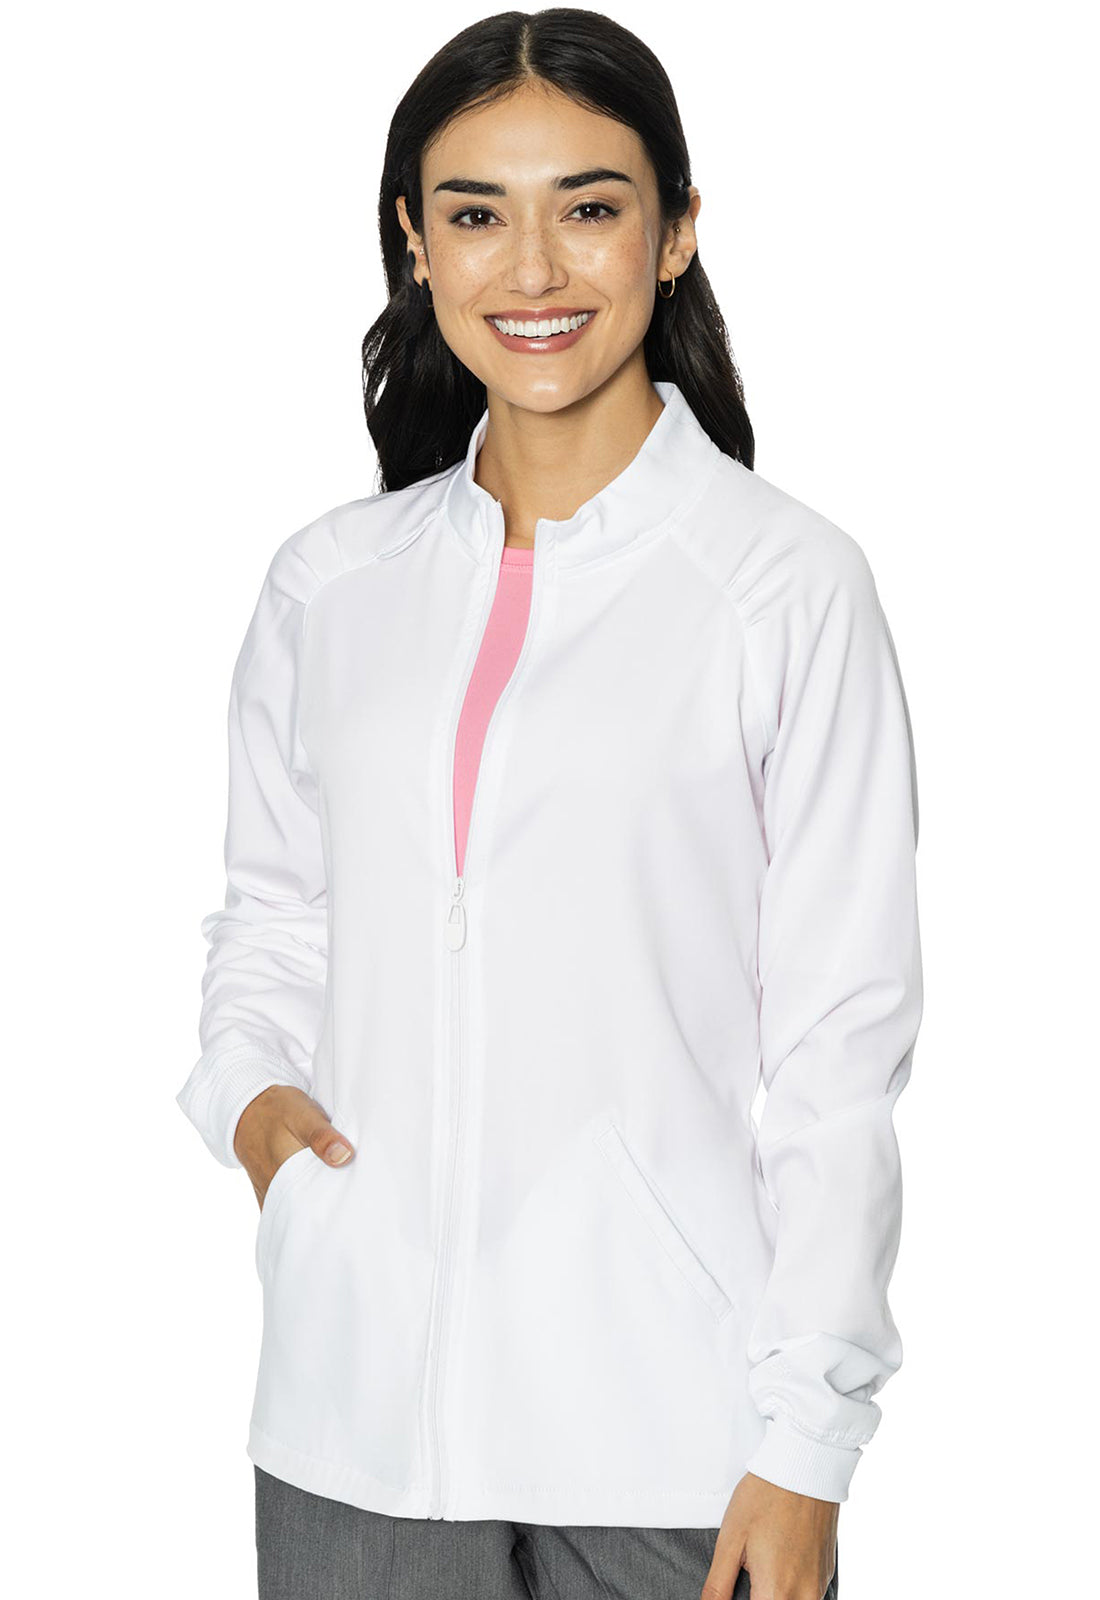 Med Couture Touch Raglan Warm Up Jacket (5 Colors Up to Size 3XL)